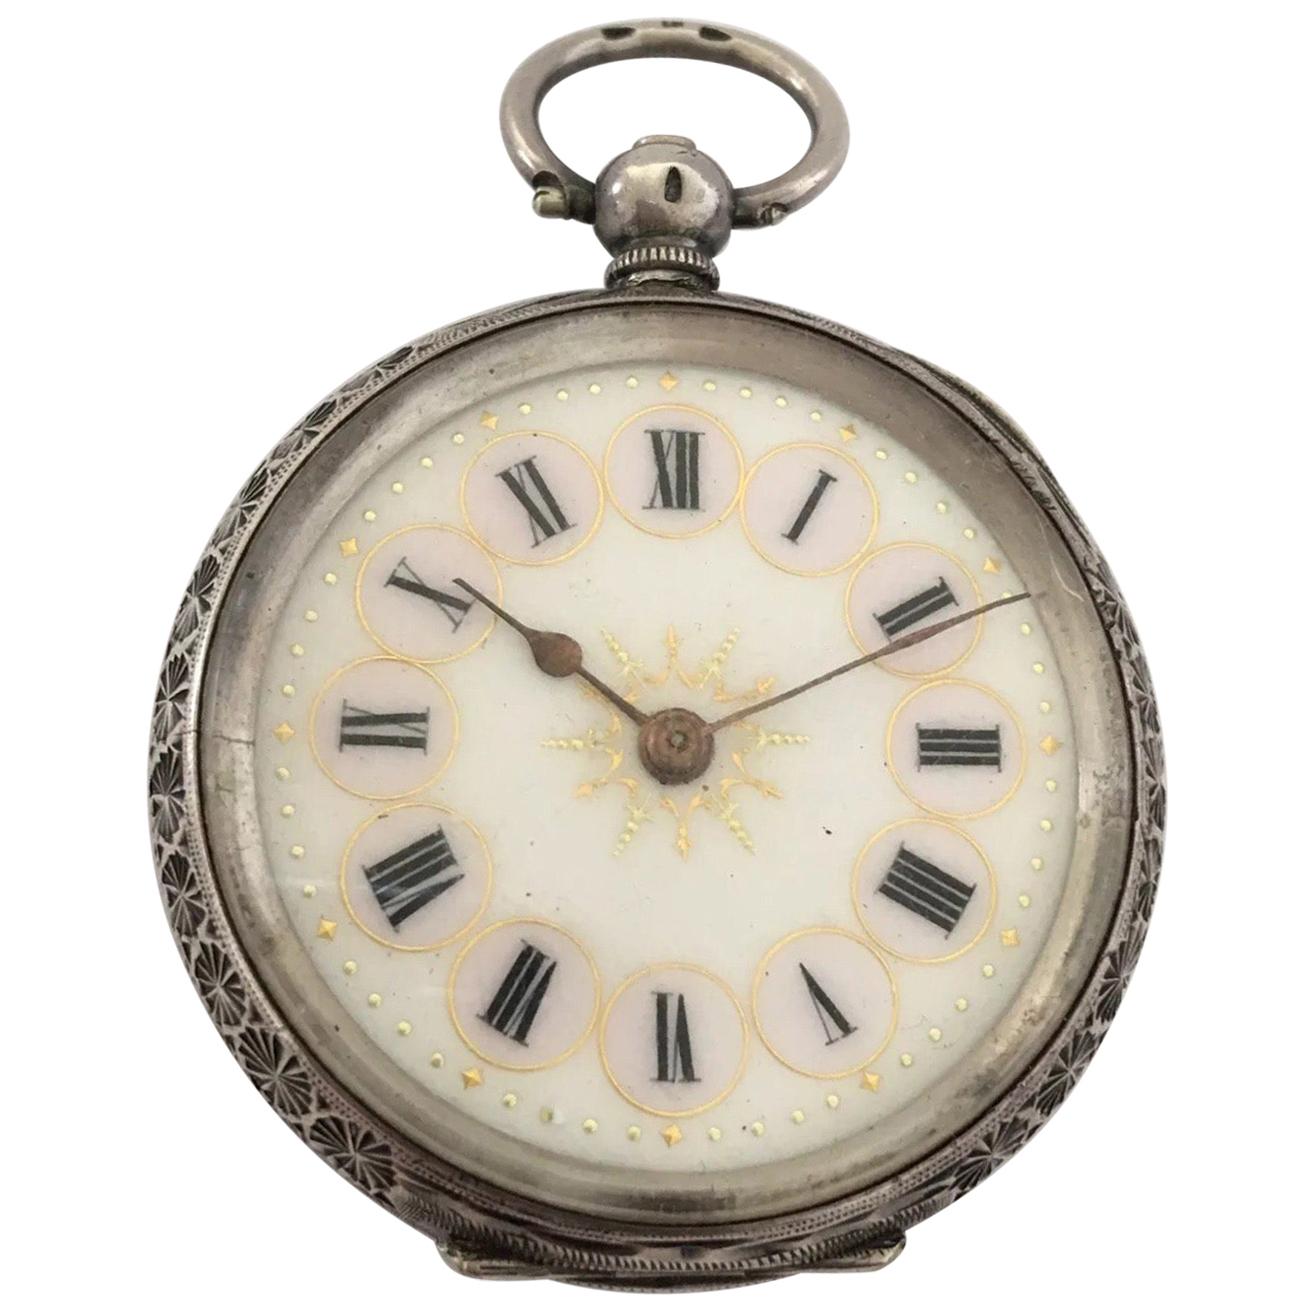 Antique Silver with Pink Enamel and Gold Inlaid Dial Key Wind Pocket Watch